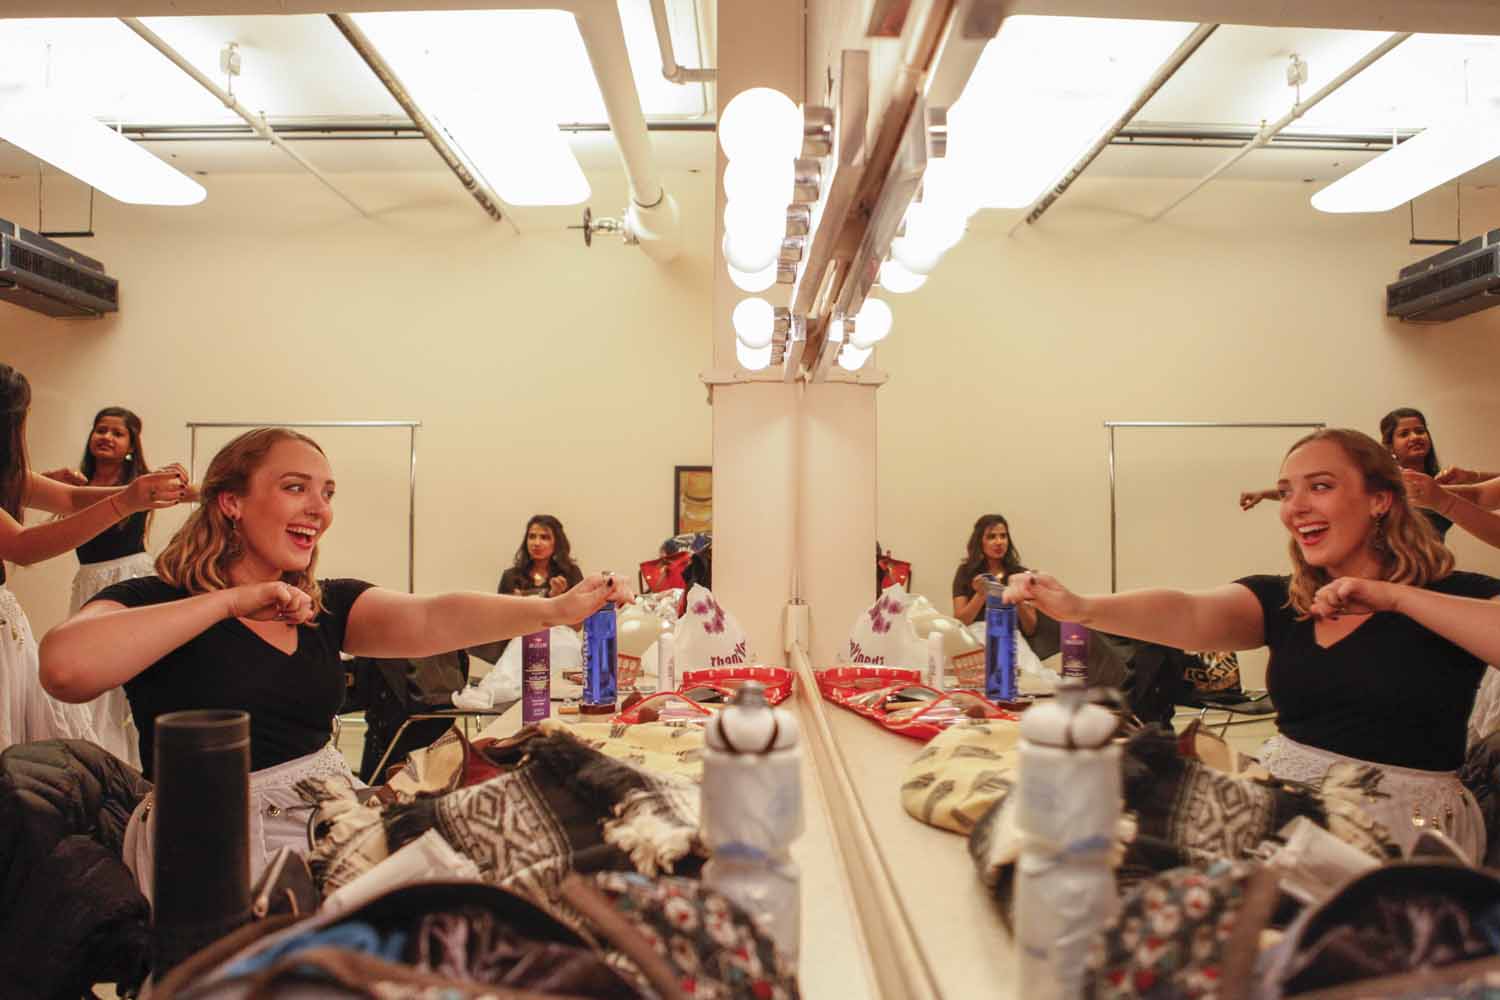 Kelsey Burns practices arm movements to her group's upcoming performance in the mirror of a dressing room in Jesse Hall as the rest of the ensembe dances around the room.